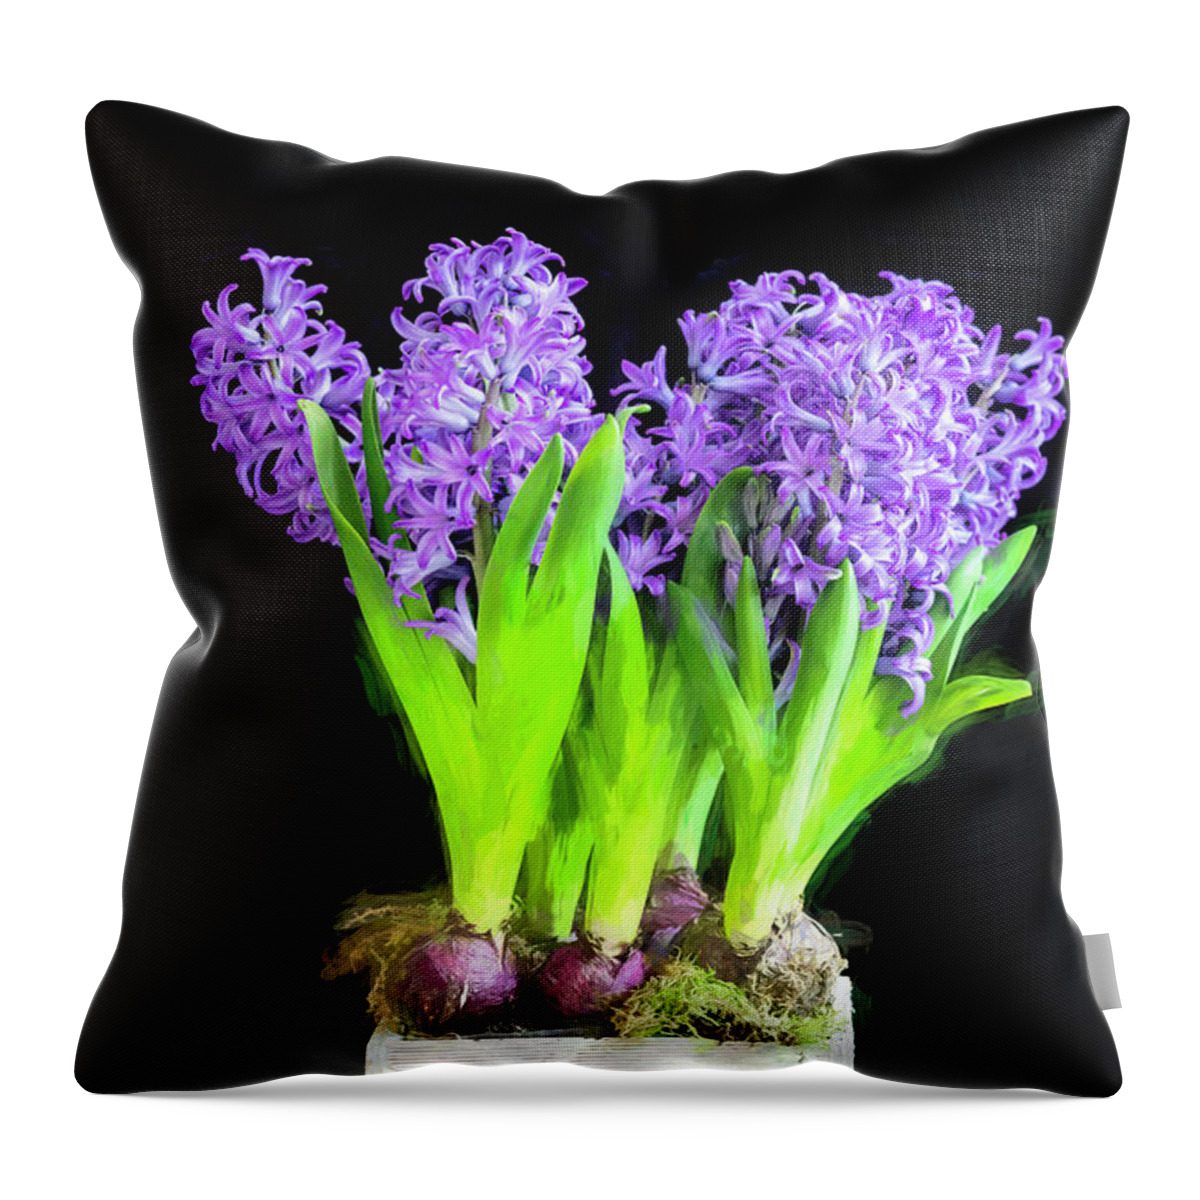 Hyacinths Throw Pillow featuring the photograph Violet Hyacinths X101 by Rich Franco